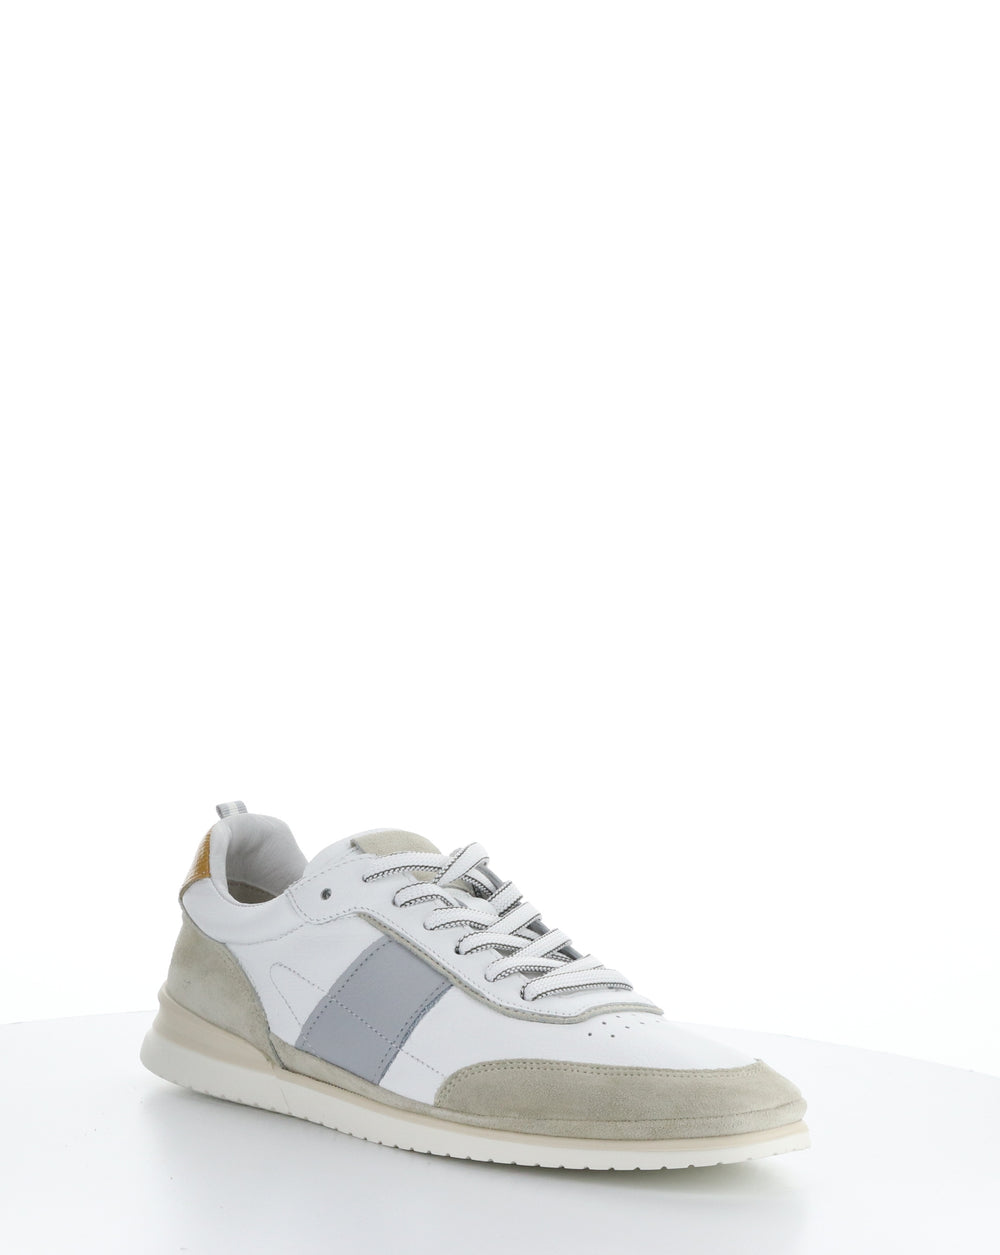 11939 BEIGE/OFFWHT/GREY Lace-up Shoes